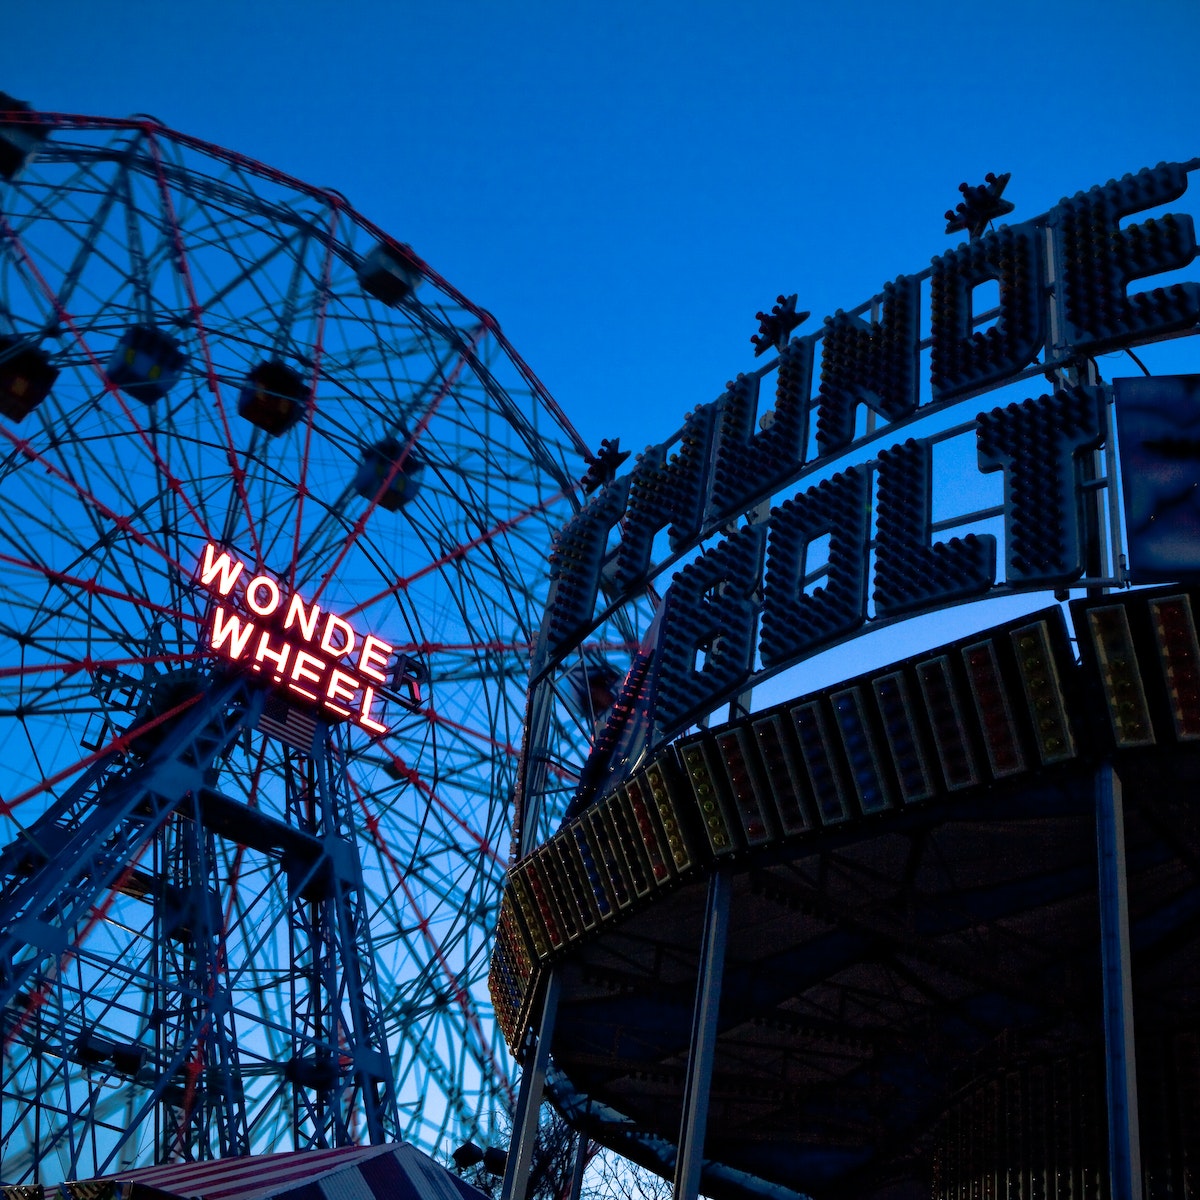 CONEY ISLAND - MAR 14: Children from around the world still ride the famous Astro Land Wonder Wheel in Coney Island, March 14, 2010, over 90 years after it was built.; Shutterstock ID 53769967; Your name (First / Last): Josh Vogel; Project no. or GL code: 56530; Network activity no. or Cost Centre: Online-Design; Product or Project: 65050/7529/Josh Vogel/LP.com Destination Galleries